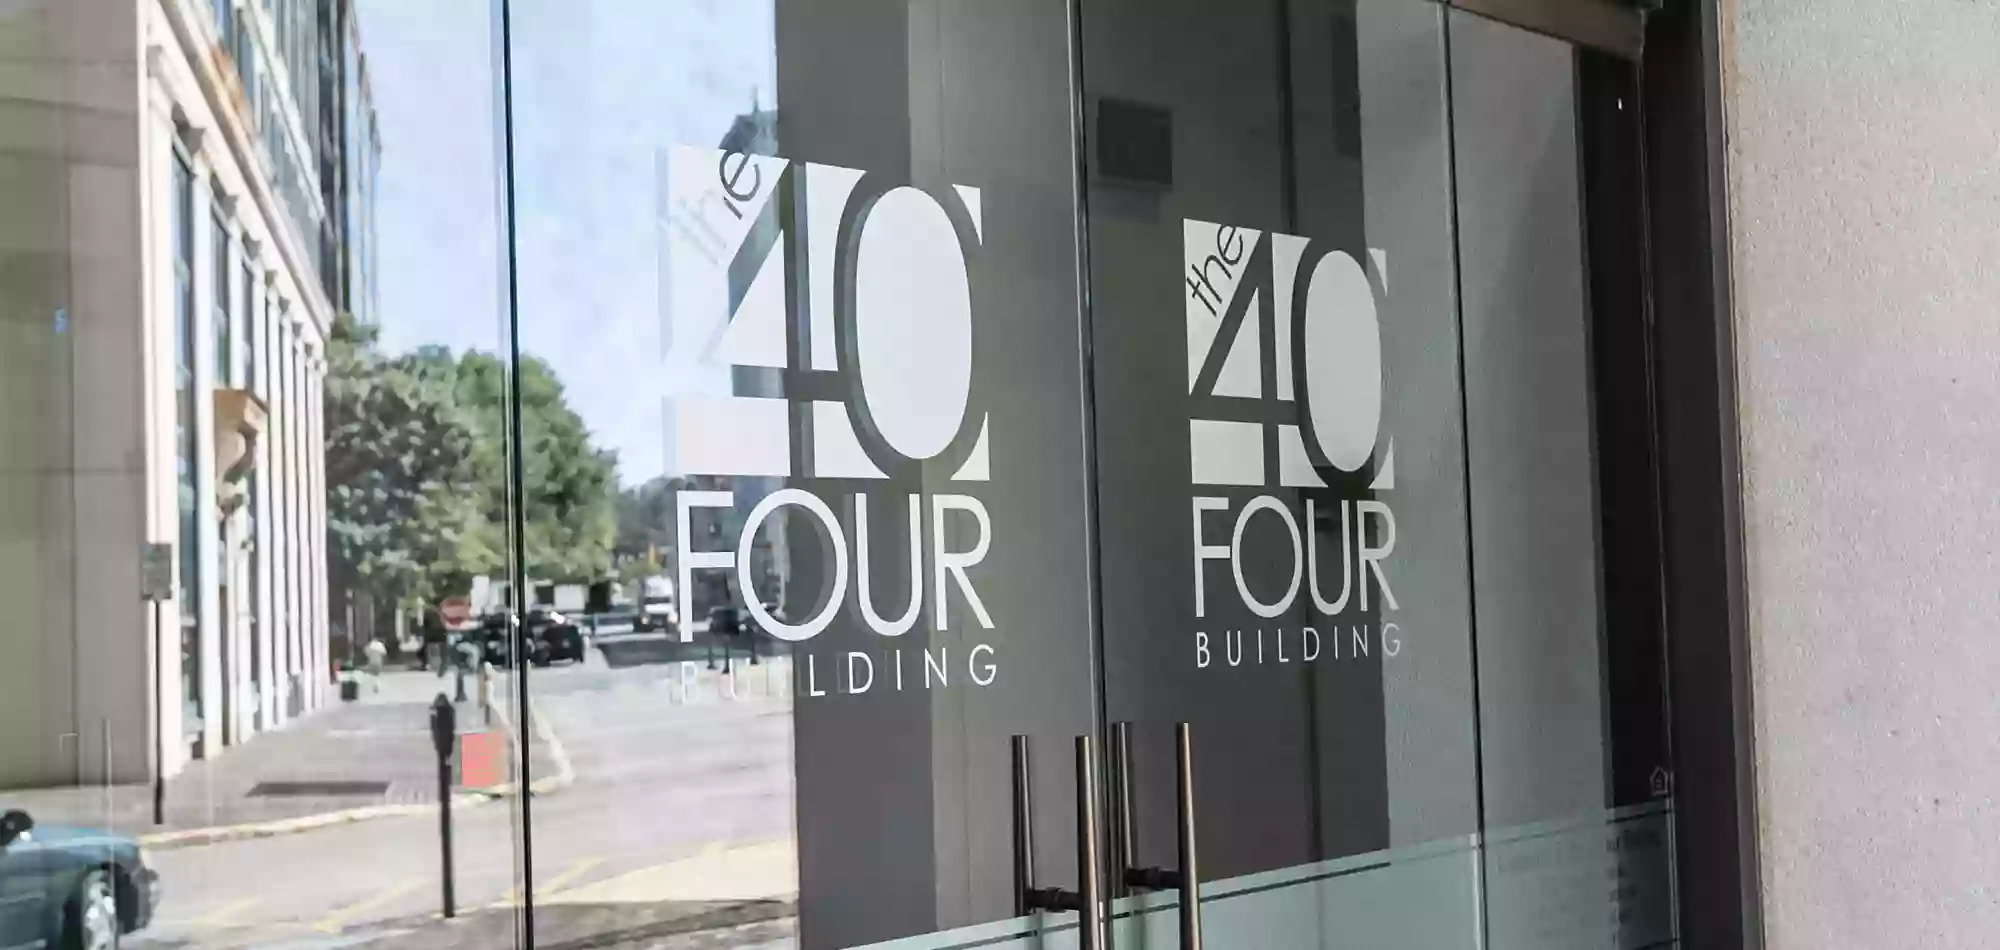 The 40 Four Building